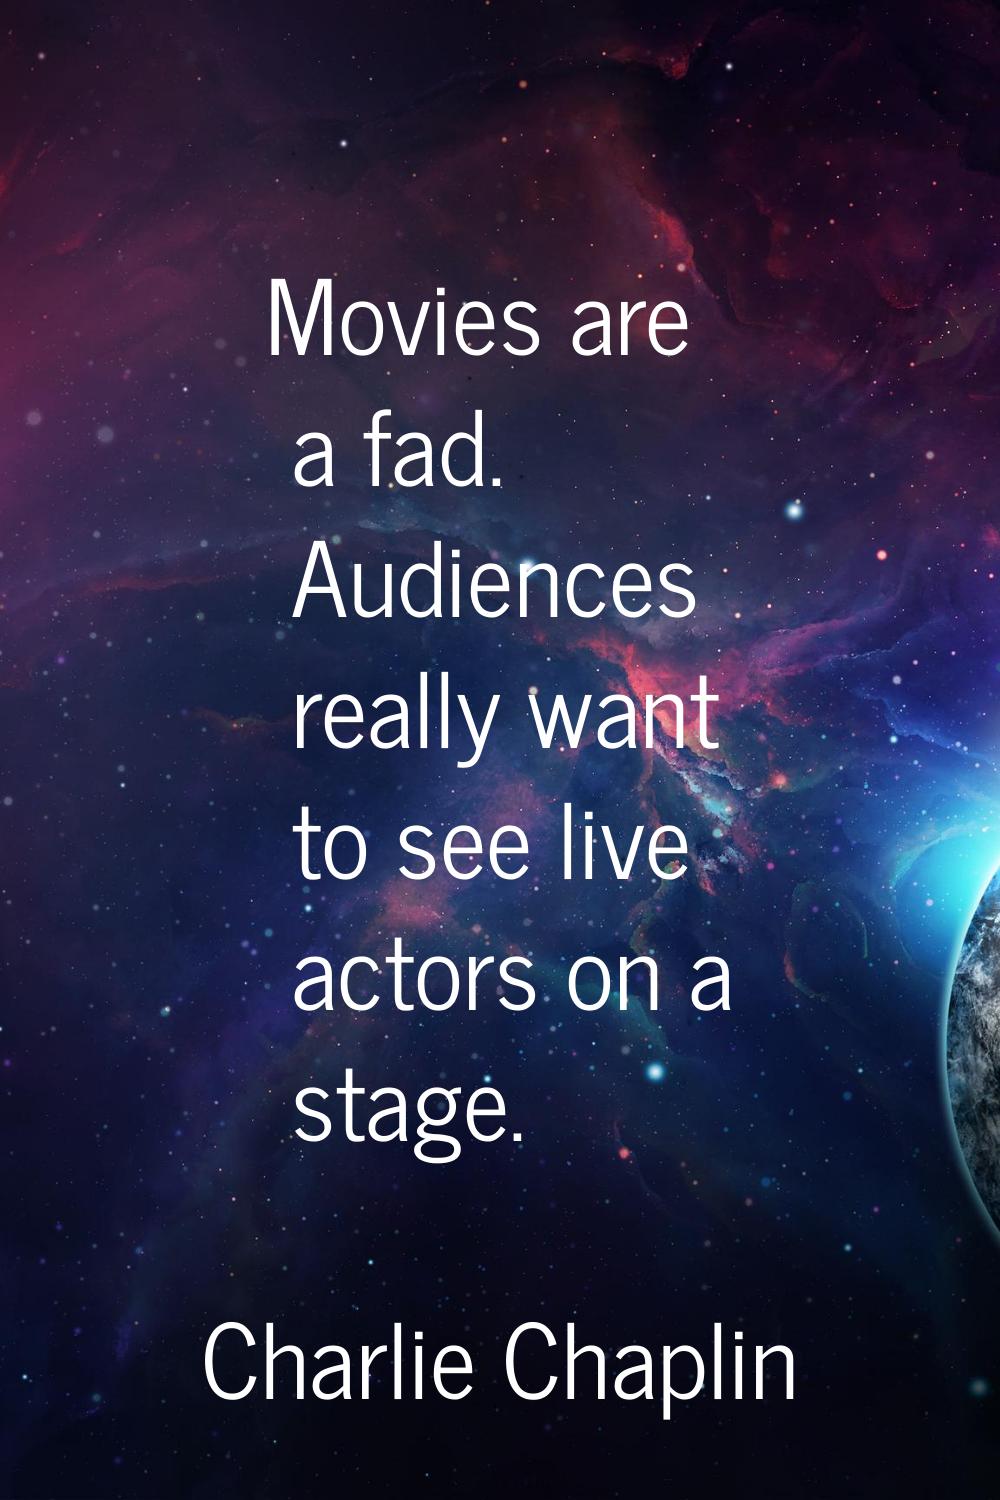 Movies are a fad. Audiences really want to see live actors on a stage.